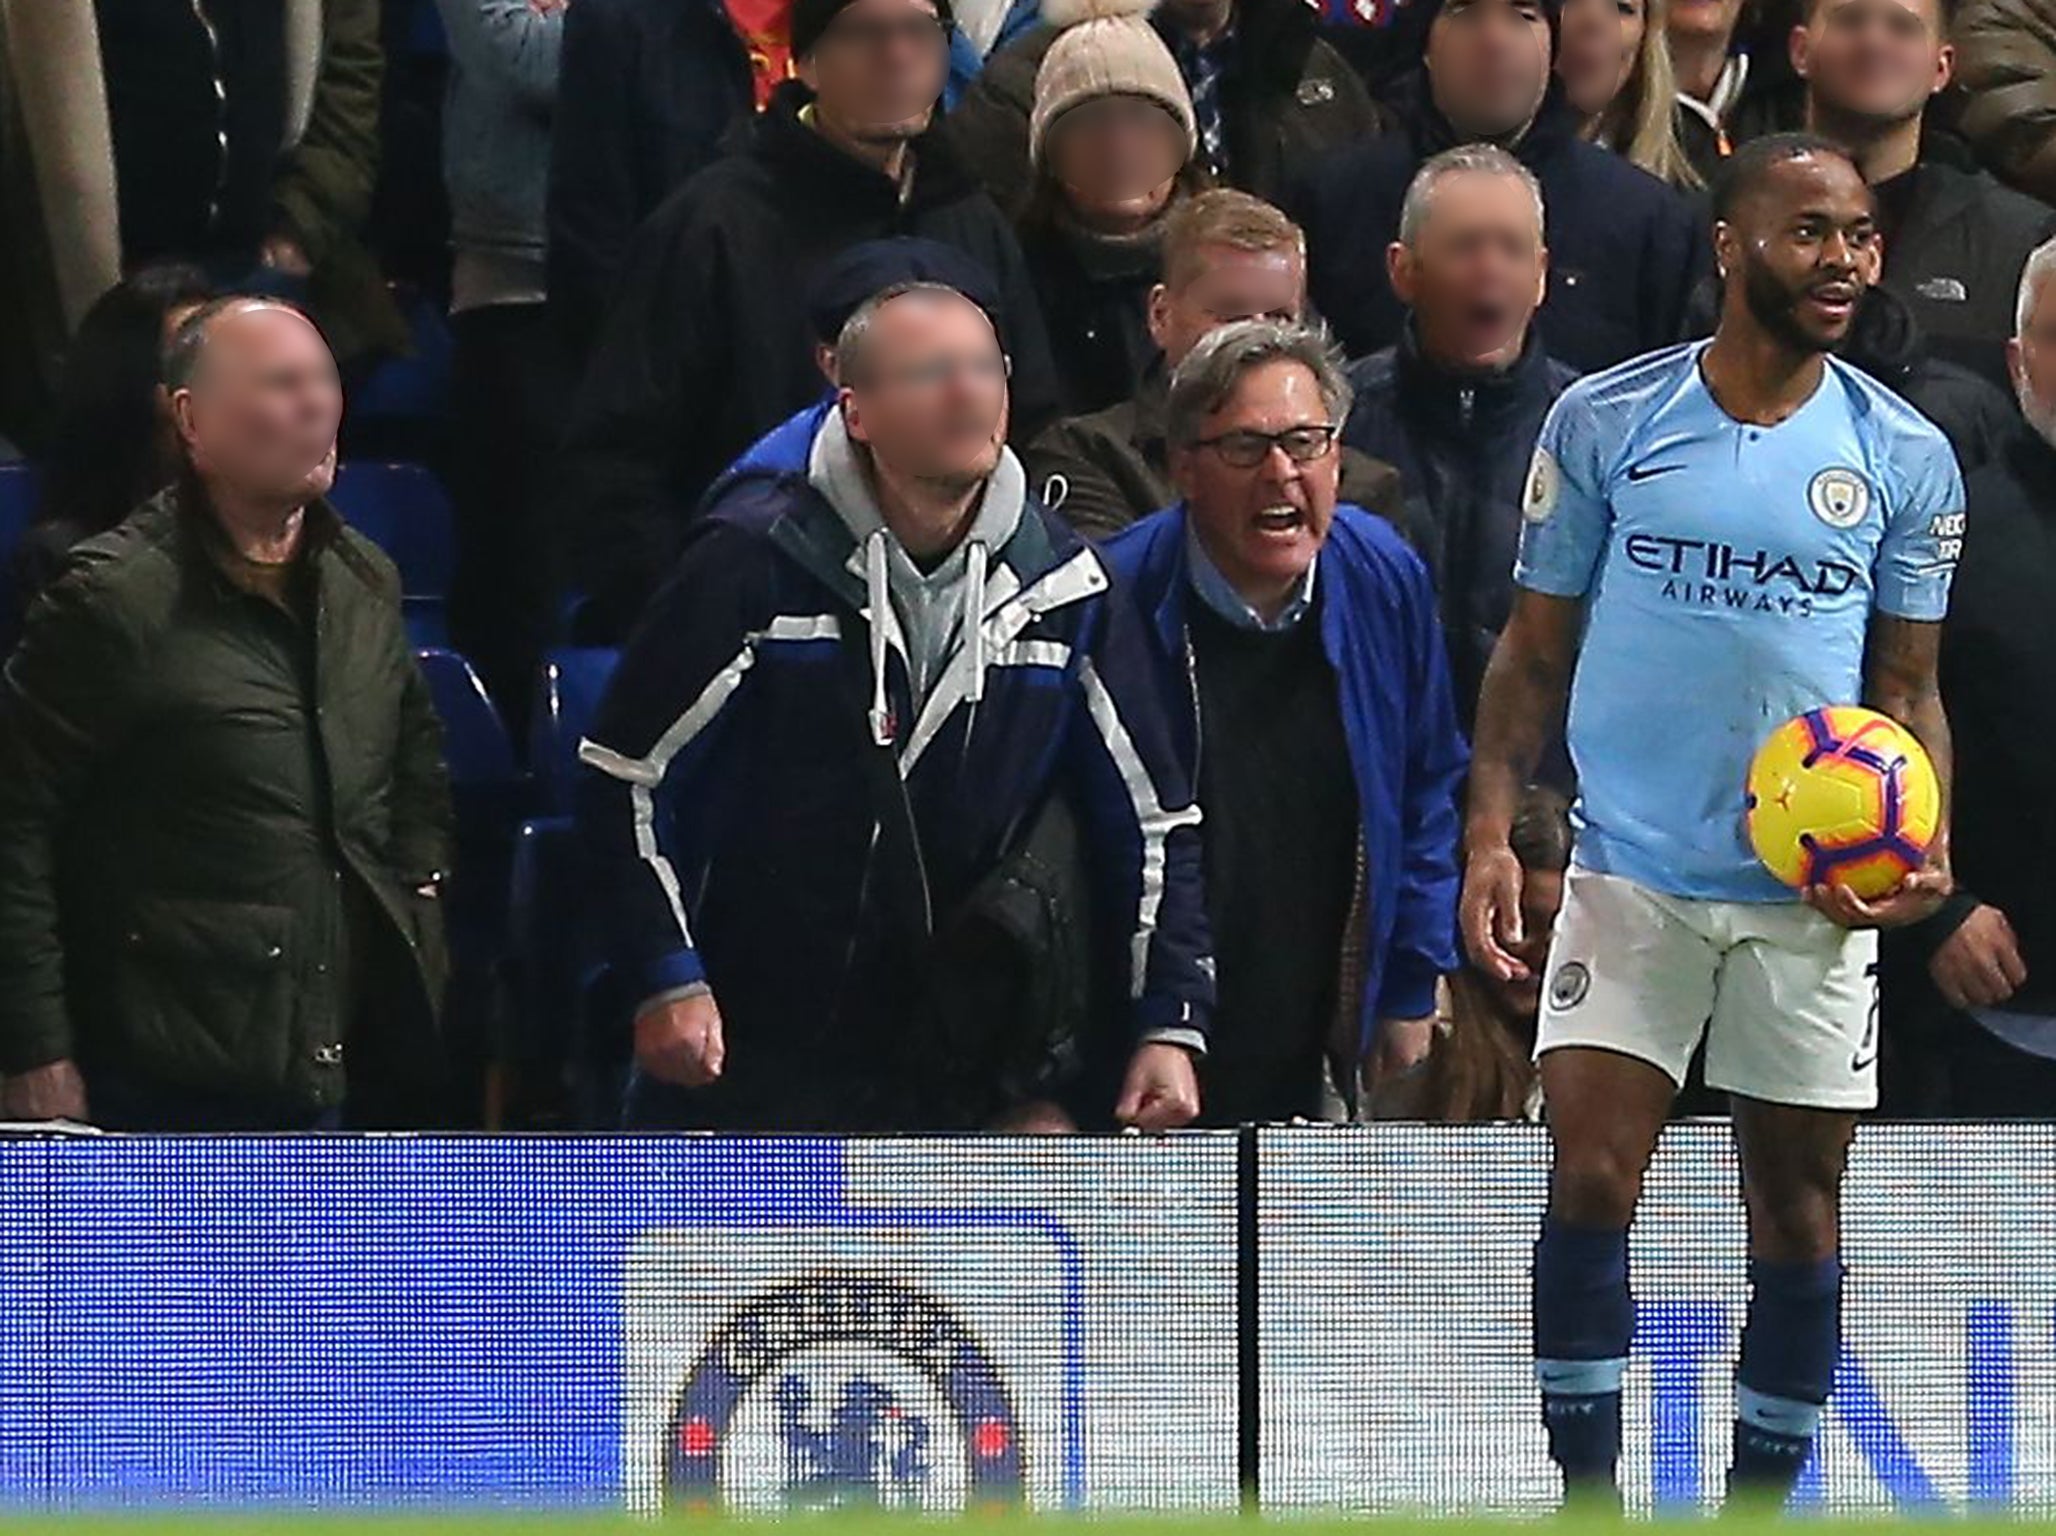 Sterling was subjected to abuse during Saturday's game